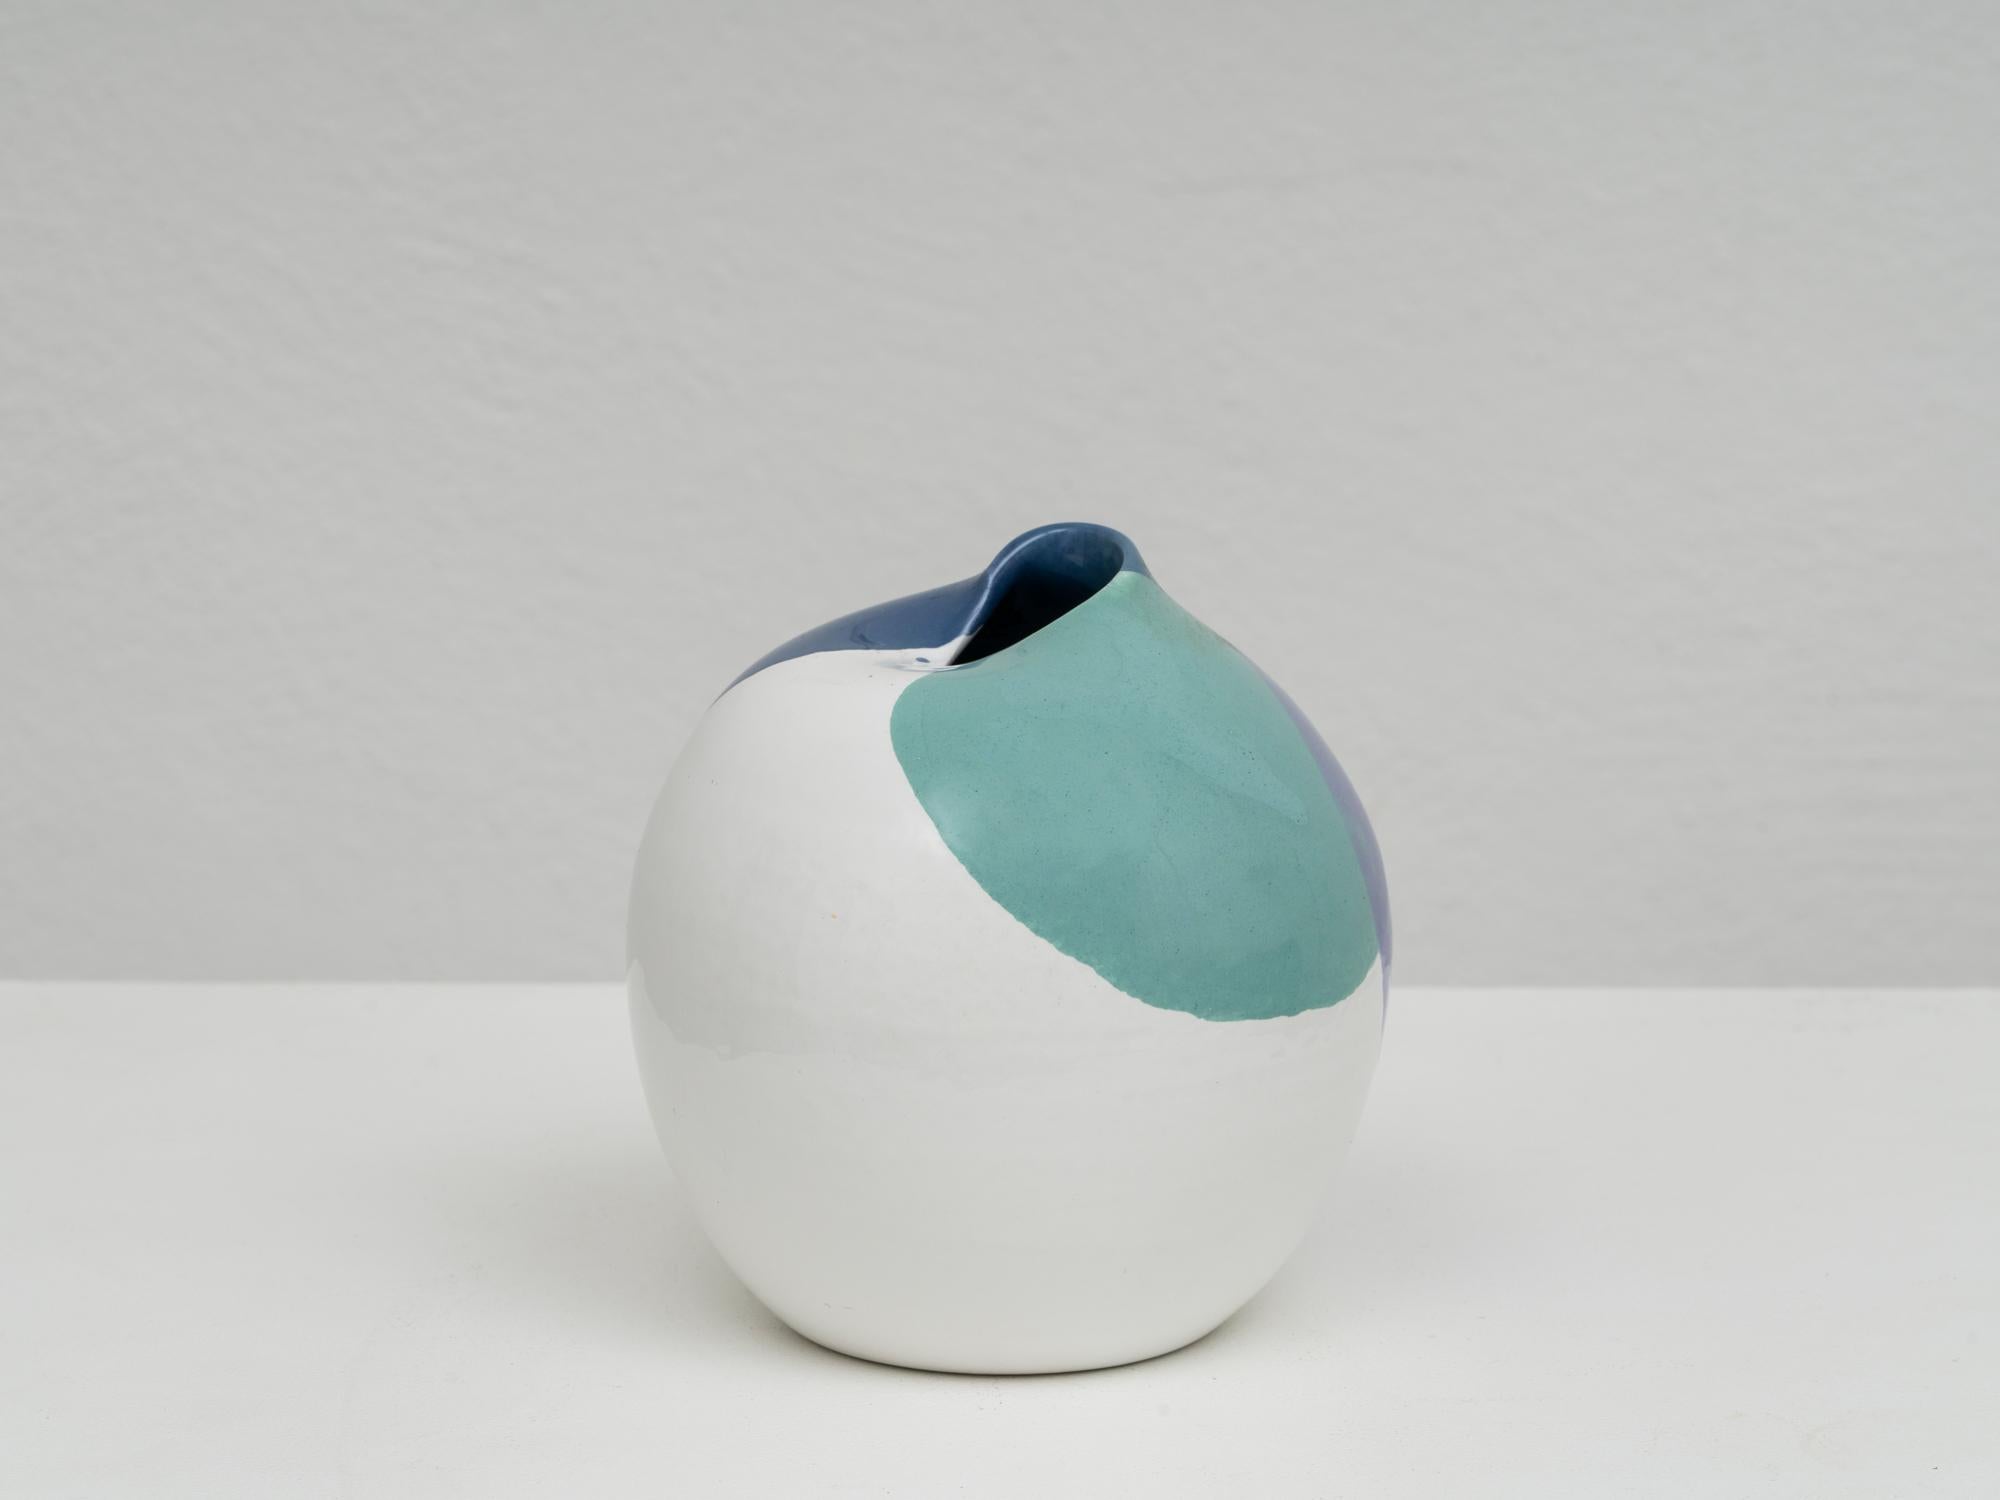 Postmodern ceramic vase by Pino Castagna, with a white glaze and a decor in a green-blue palette. This piece was manufactured in the artist's laboratoy in Costermano, near the Garda lake, in the 1990s. It is signed under the base and remains in good